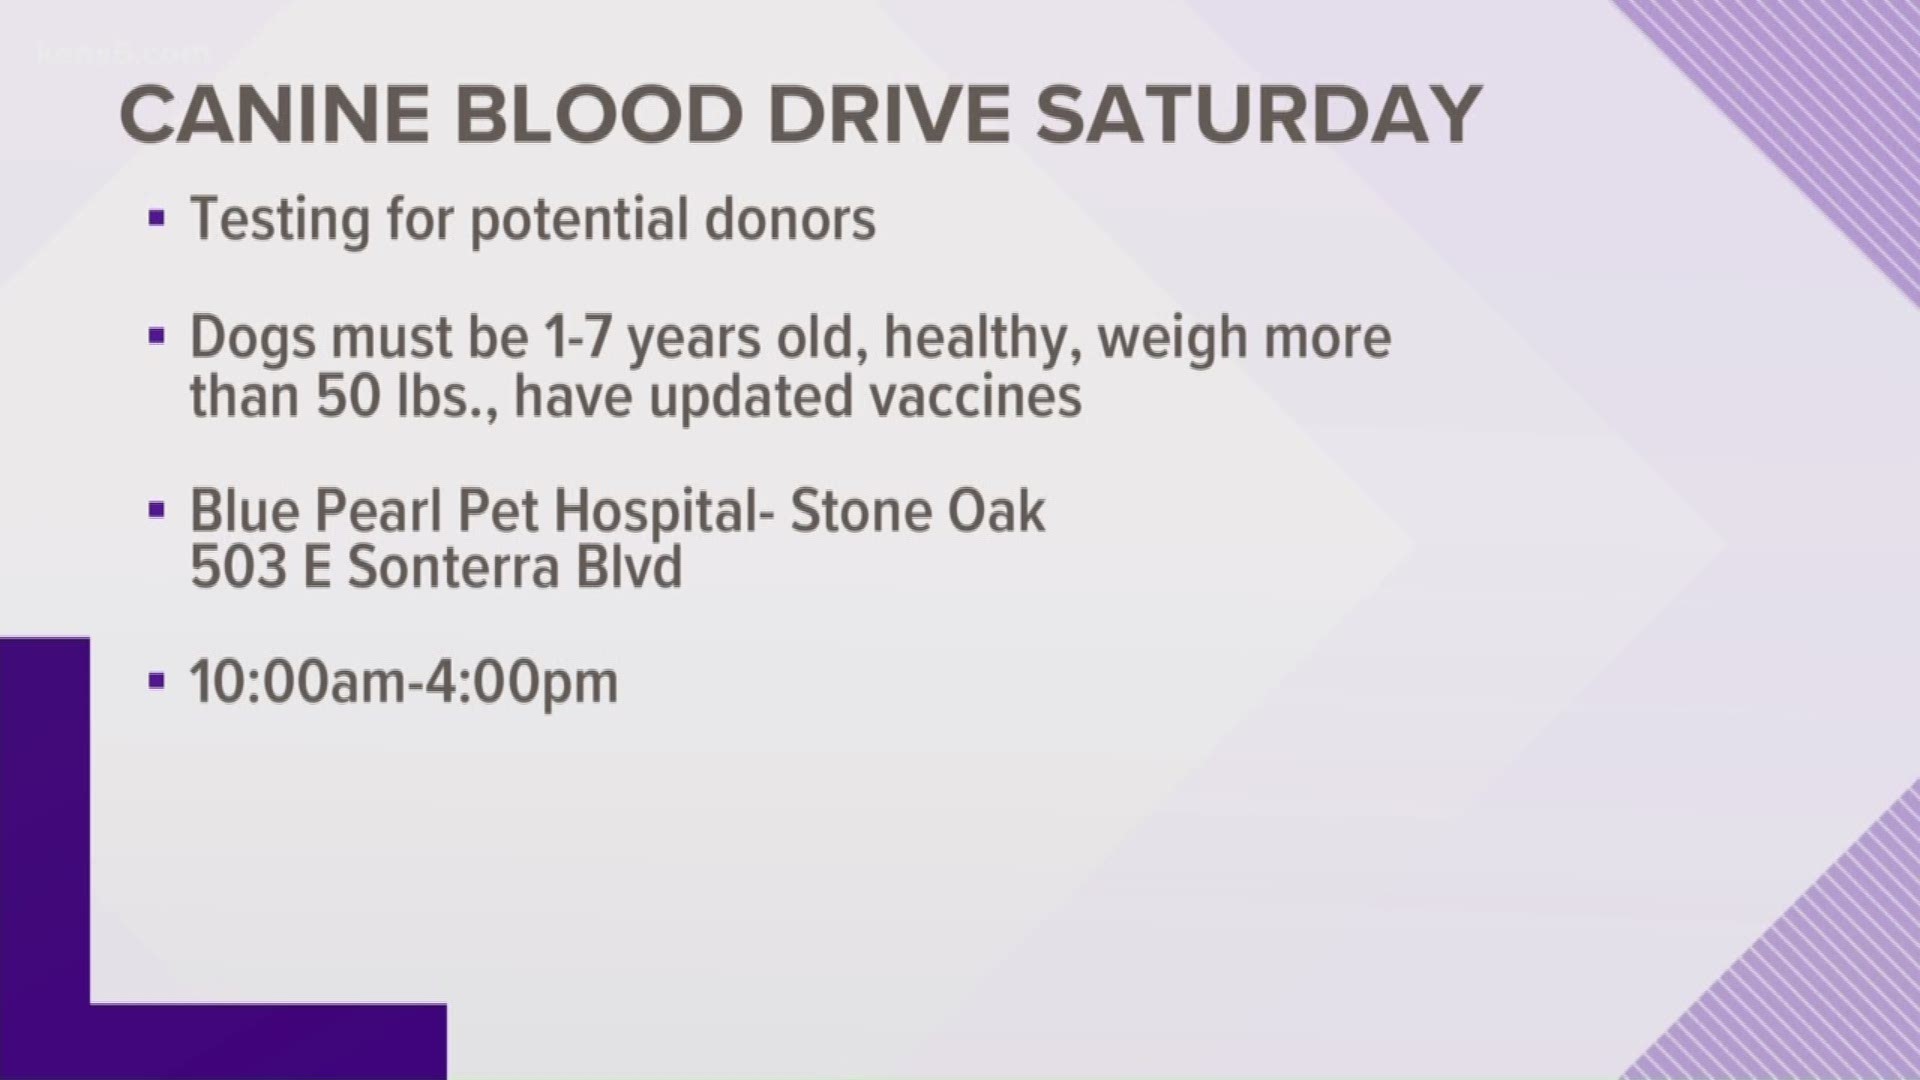 Did you know dogs can donate blood to other pets in need? This Saturday is a dog blood drive at Blue Pearl Pet Hospital.